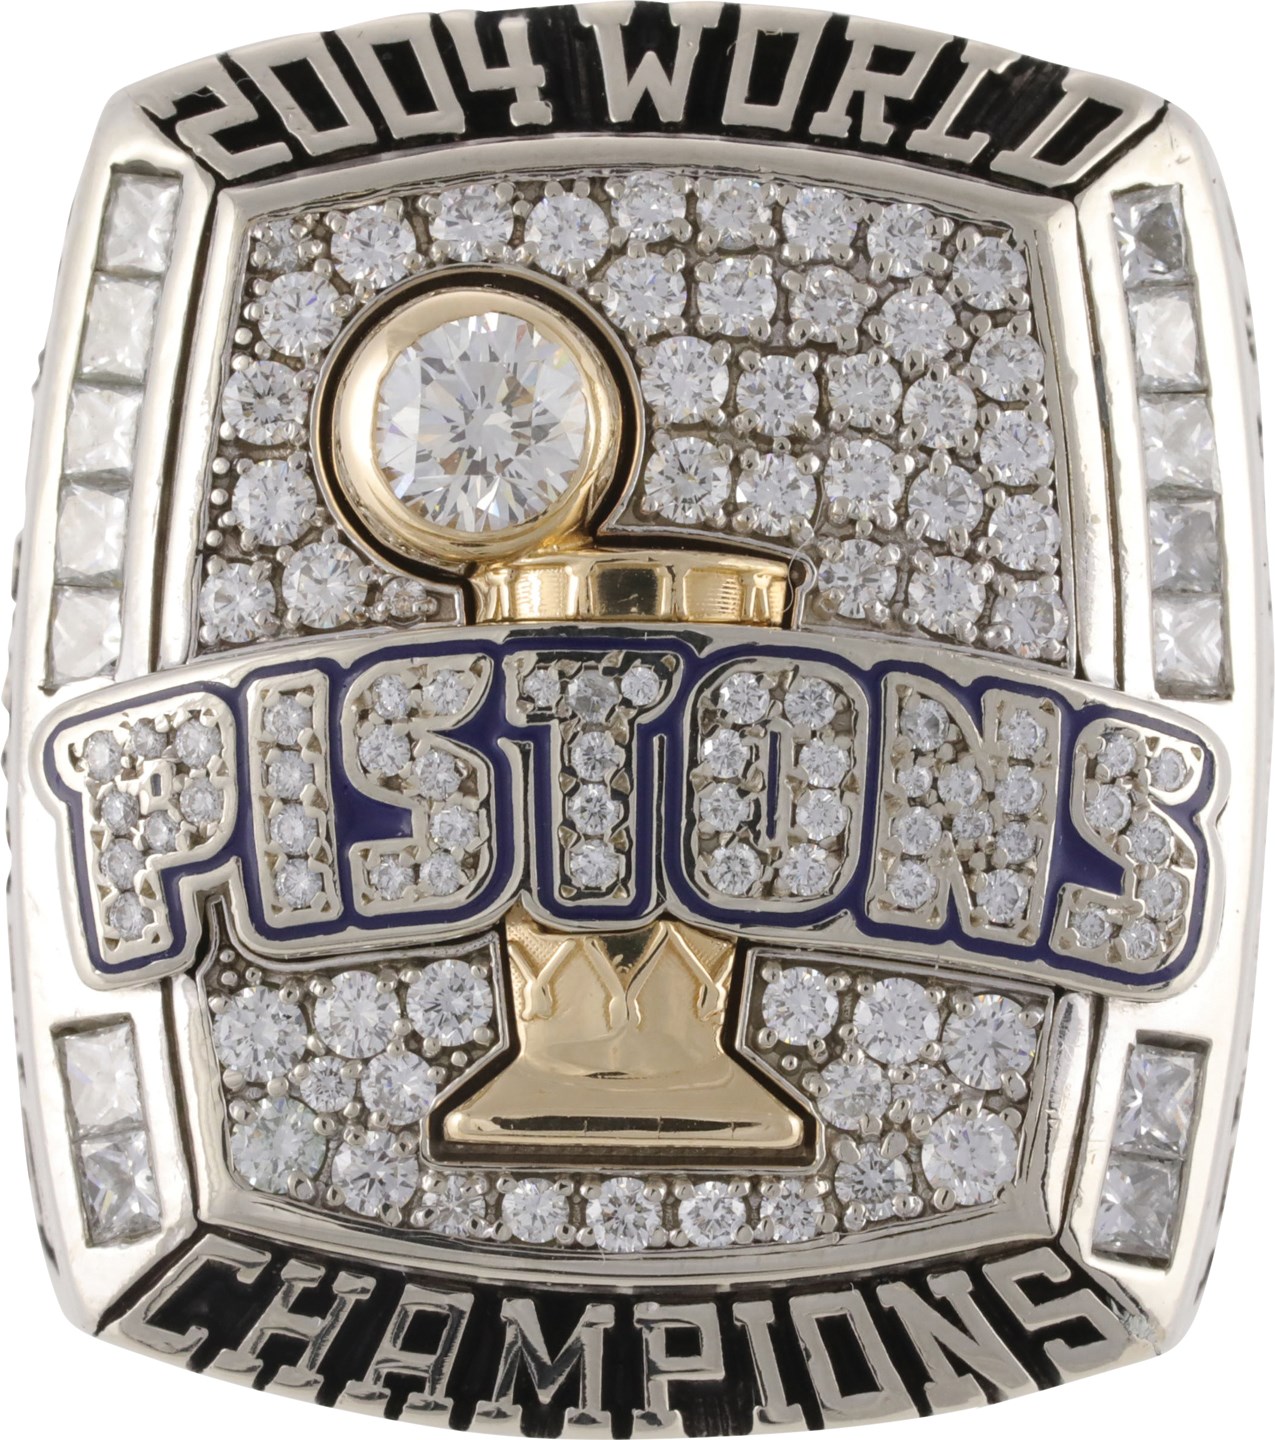 - Extremely Rare 2004 Detroit Pistons NBA Championship Player Ring Presented to Mike James